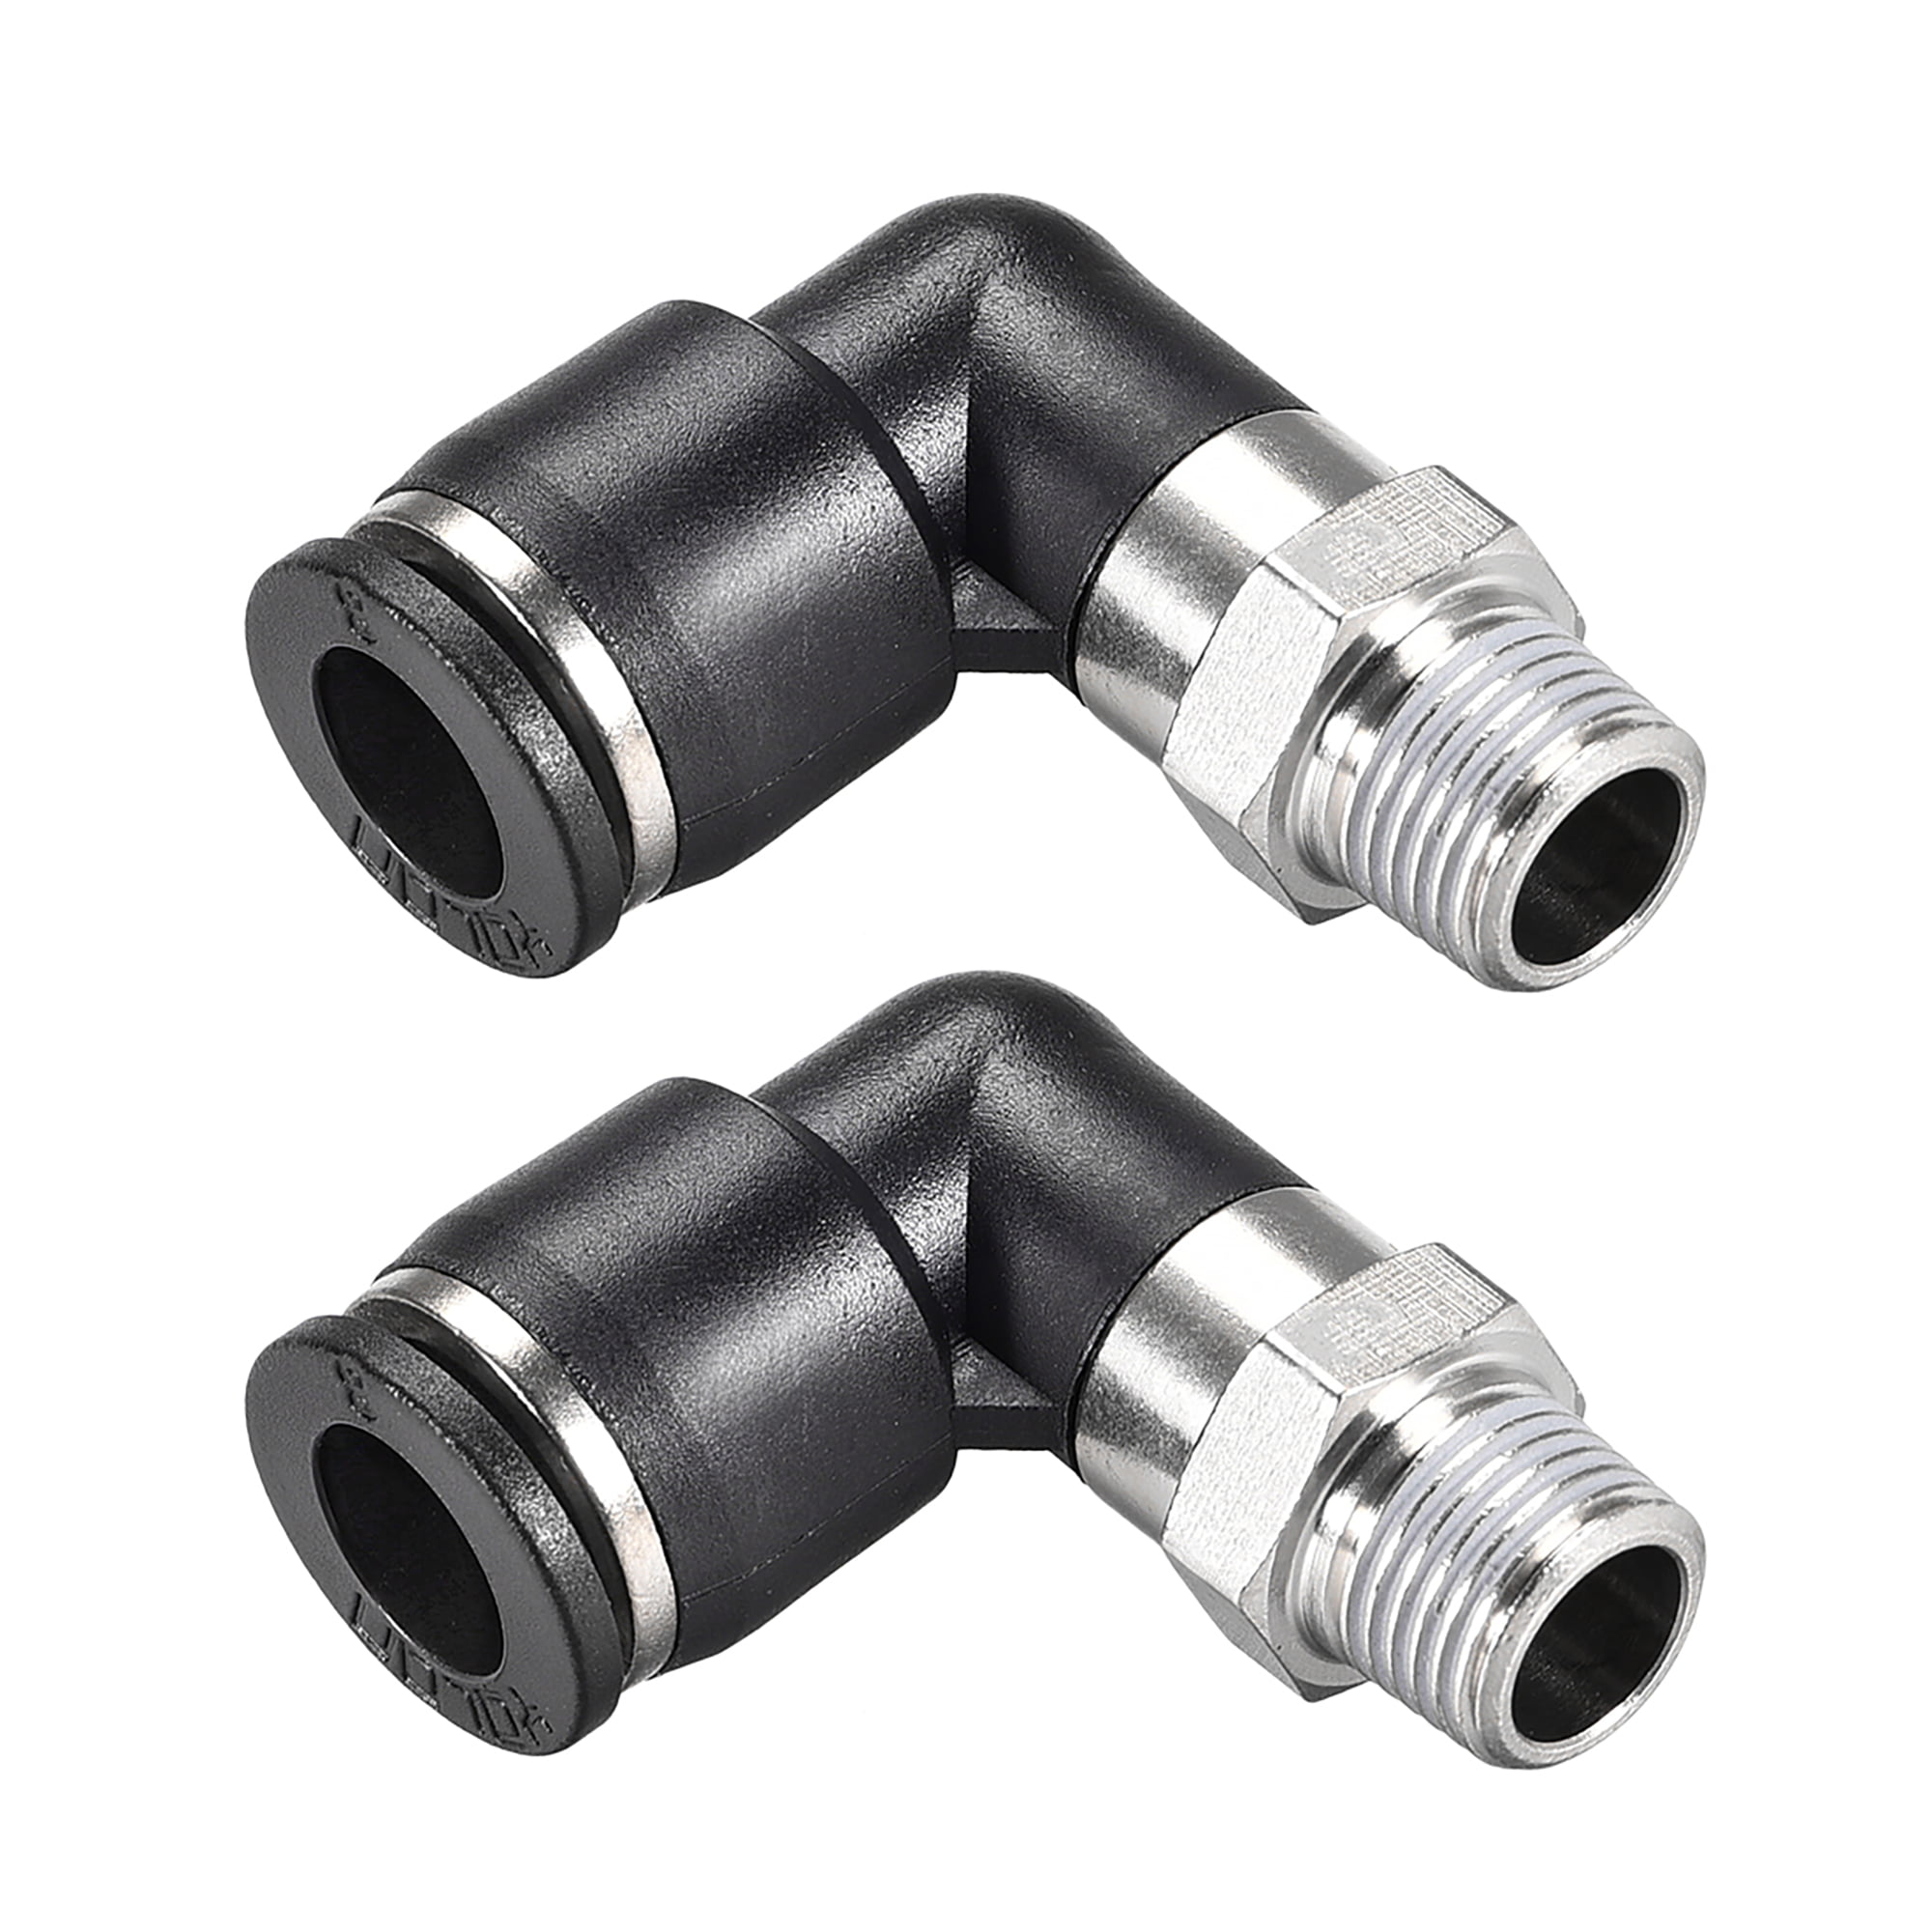 5PCS Pneumatic Push in Connector 5/16" OD Tube x 1/8" Male NPT 90 Degree Elbow 